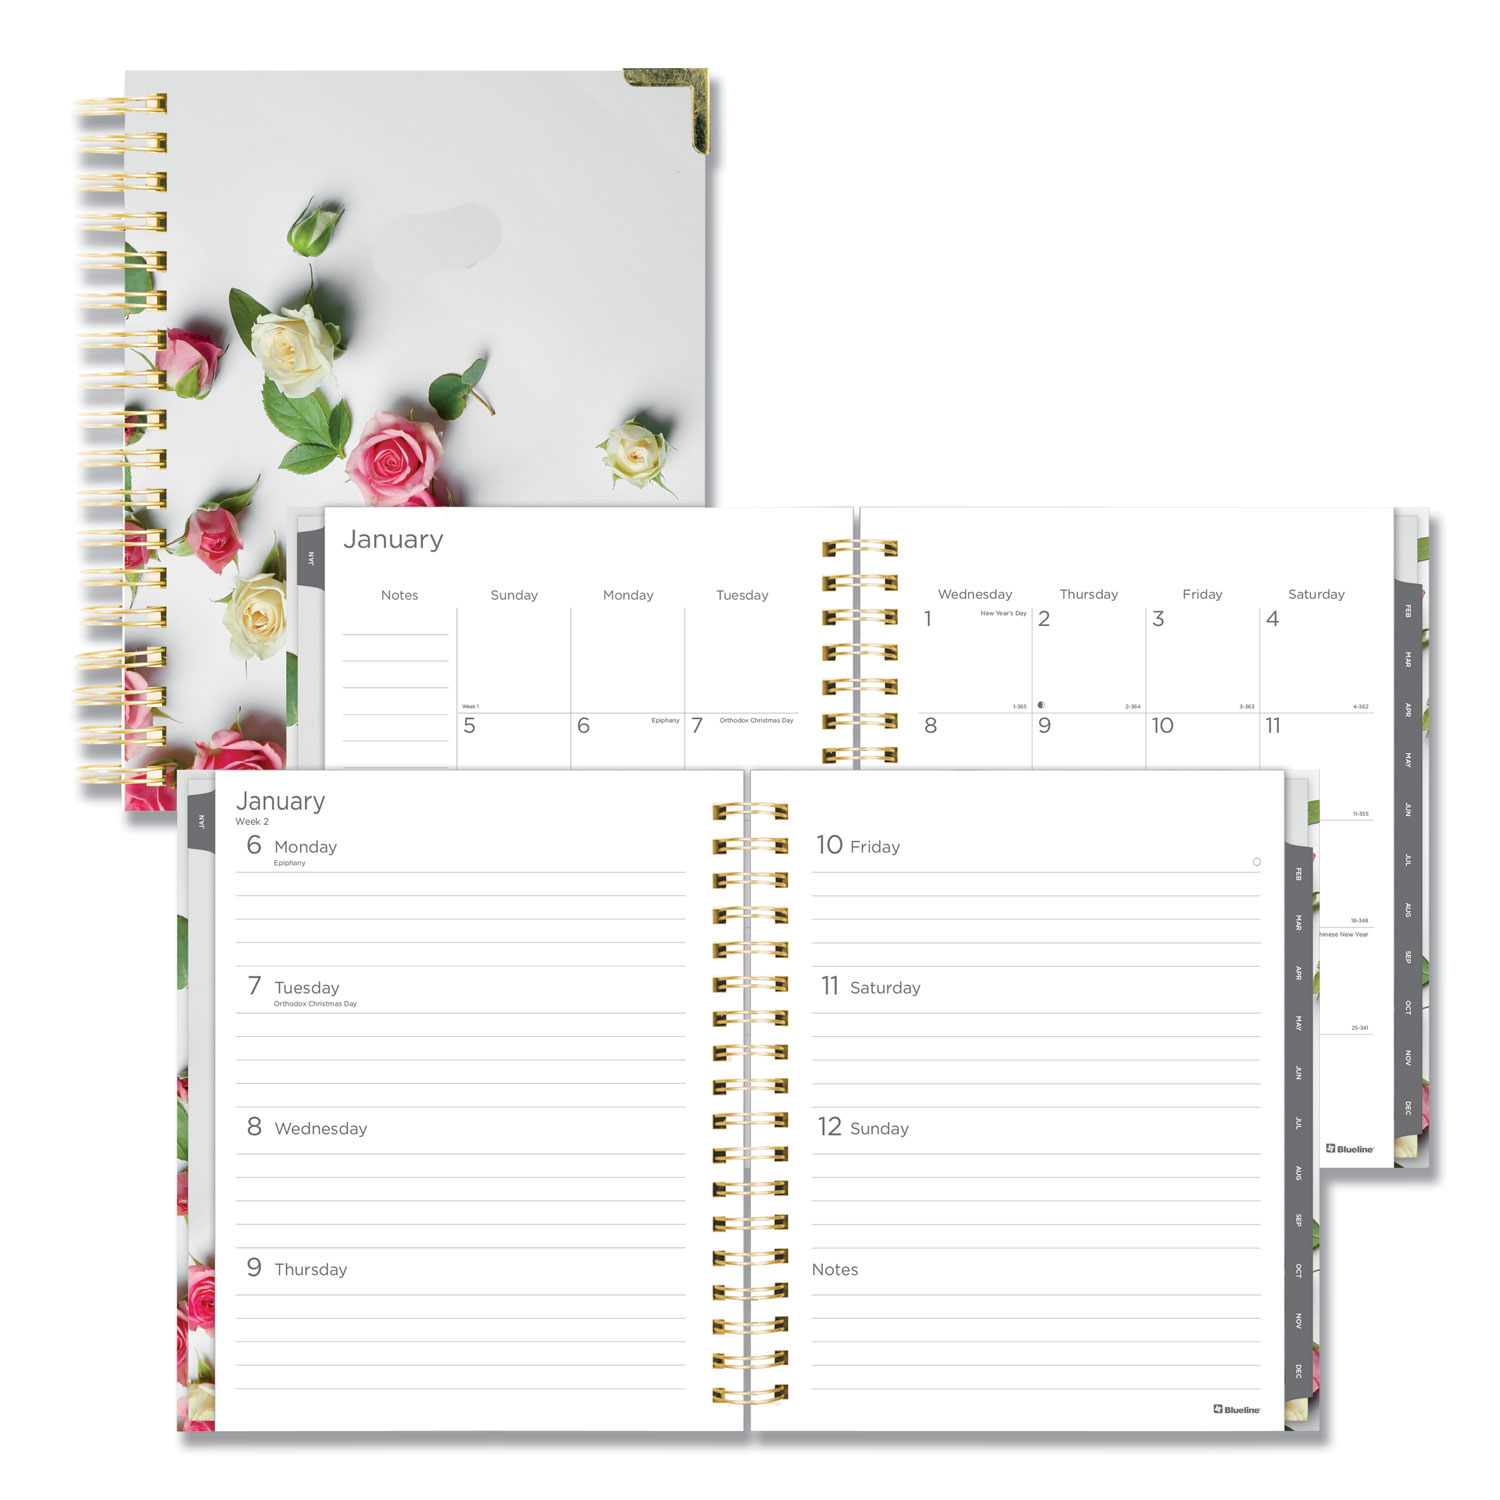  Blueline C36002.01 Romantic Weekly/Monthly Hard Cover Planner, 9 1/4 x 7 1/4, Roses Cover, 2020 (REDC3600201) 